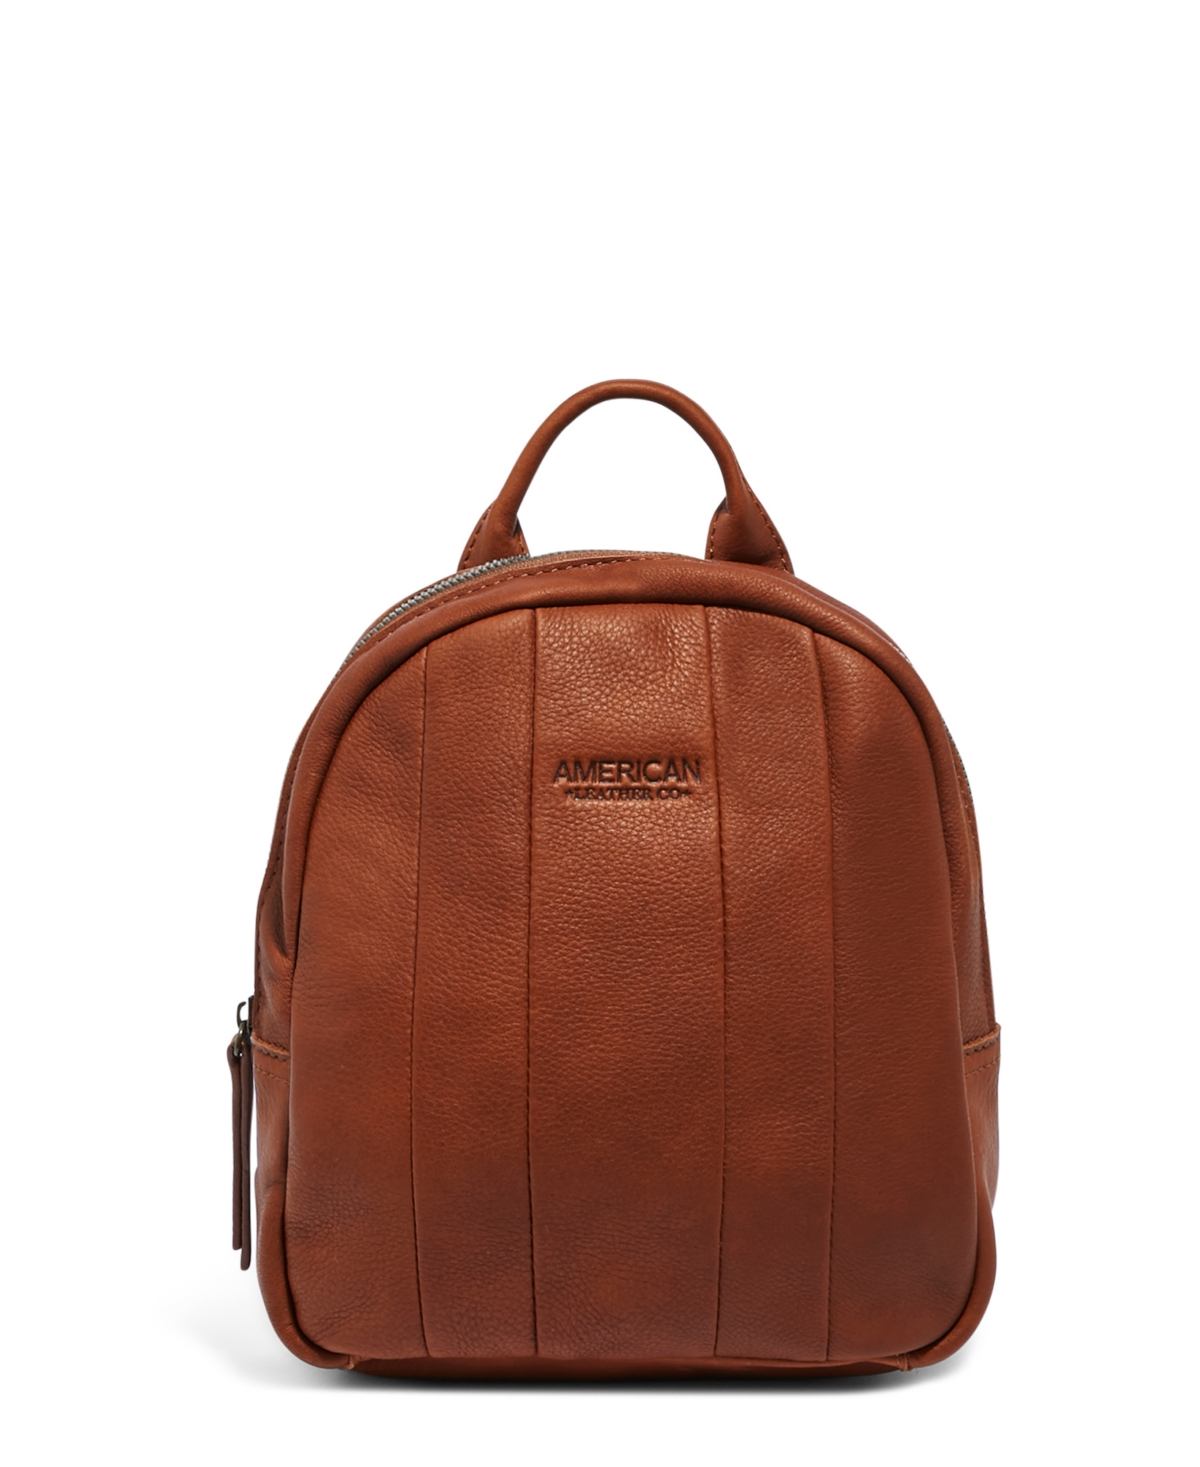 American Leather Co. Women's Denise Backpack In Brandy Smooth